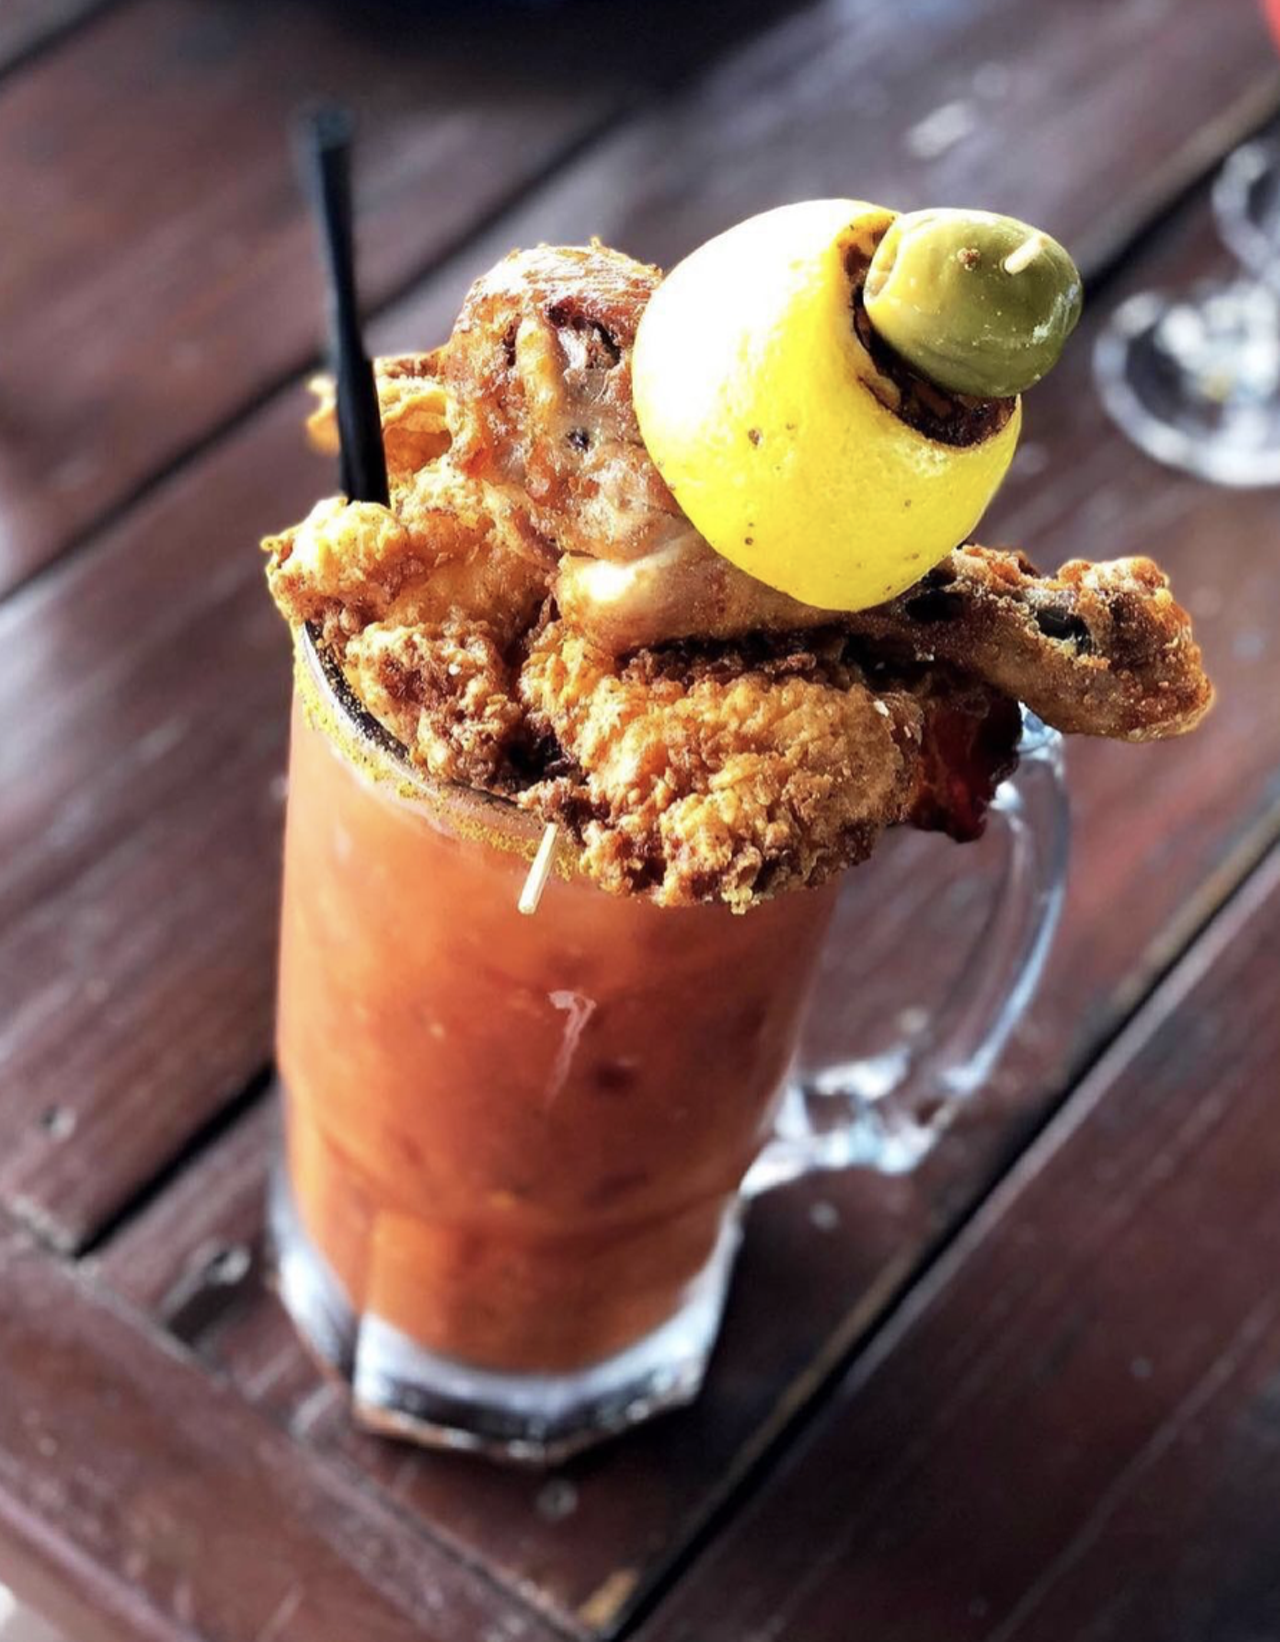 Max's Wine Dive
340 E Basse Rd Ste 101 Ste 101, (210) 444-9547, maxswinedive.com
If we told you that getting jalapeño buttermilk fried chicken as a garnish to your Bloody Mary was an option, would you need any more convincing? Didn’t think so. Give it a shot at Max’s weekend brunch.  
Photo via Instagram / maxswinedive